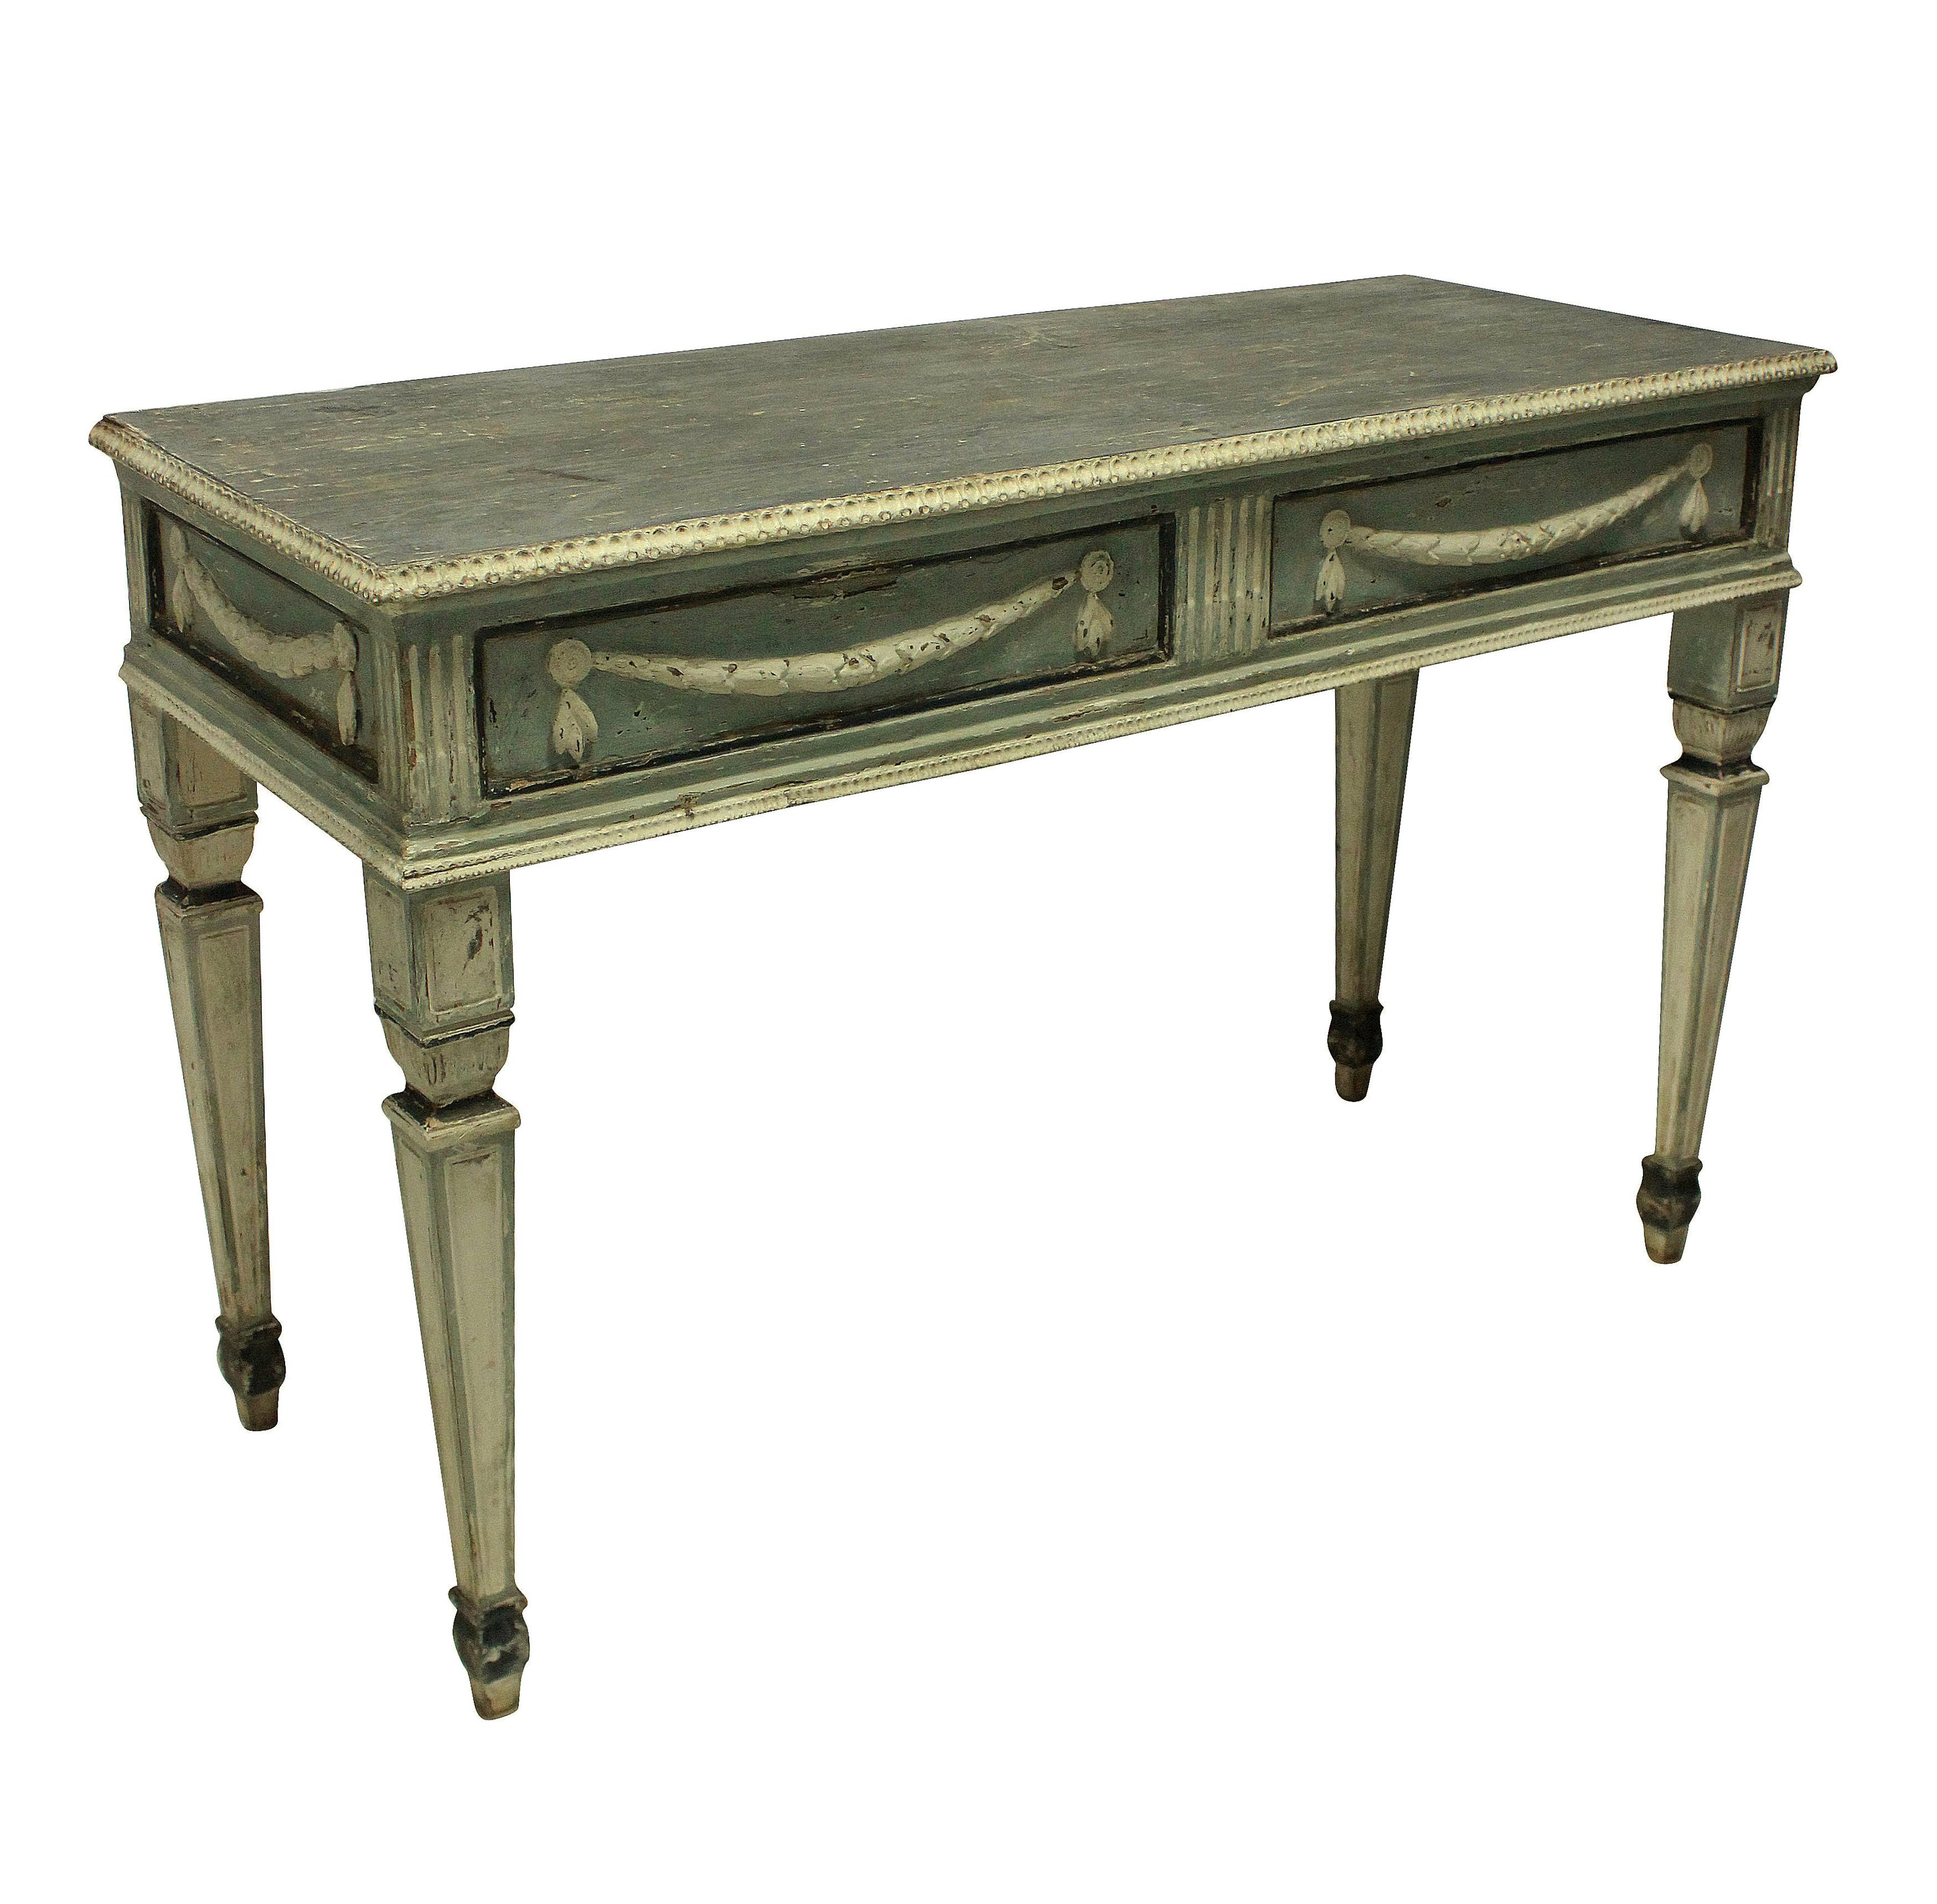 A pair of large Northern Italian 18th century console tables in the neoclassical taste, with swag decoration. All of the paint is original and the colors are beautifully subtle in duck egg blues, soft white and charcoal.